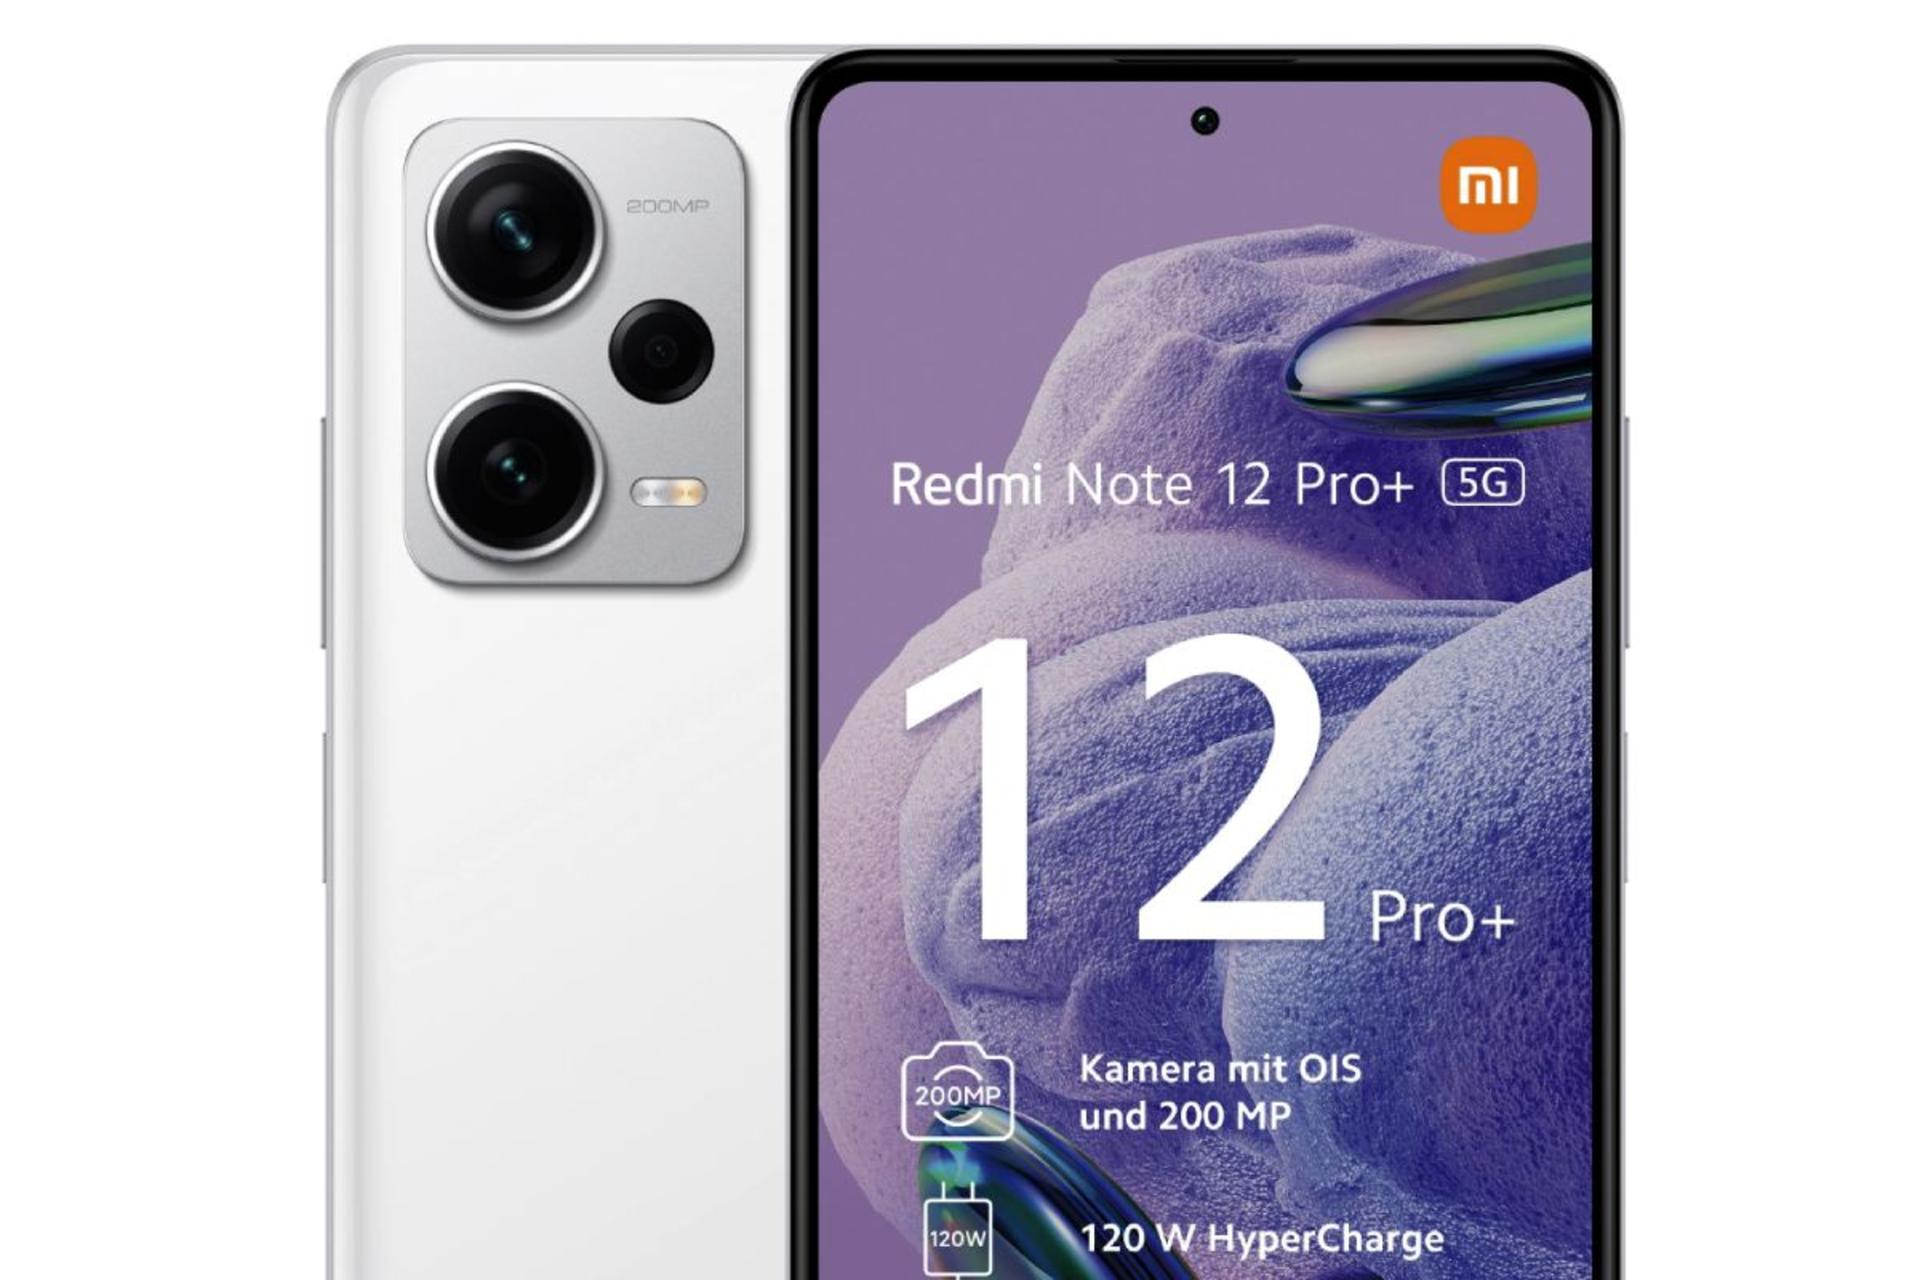 Note 12 pro speed edition